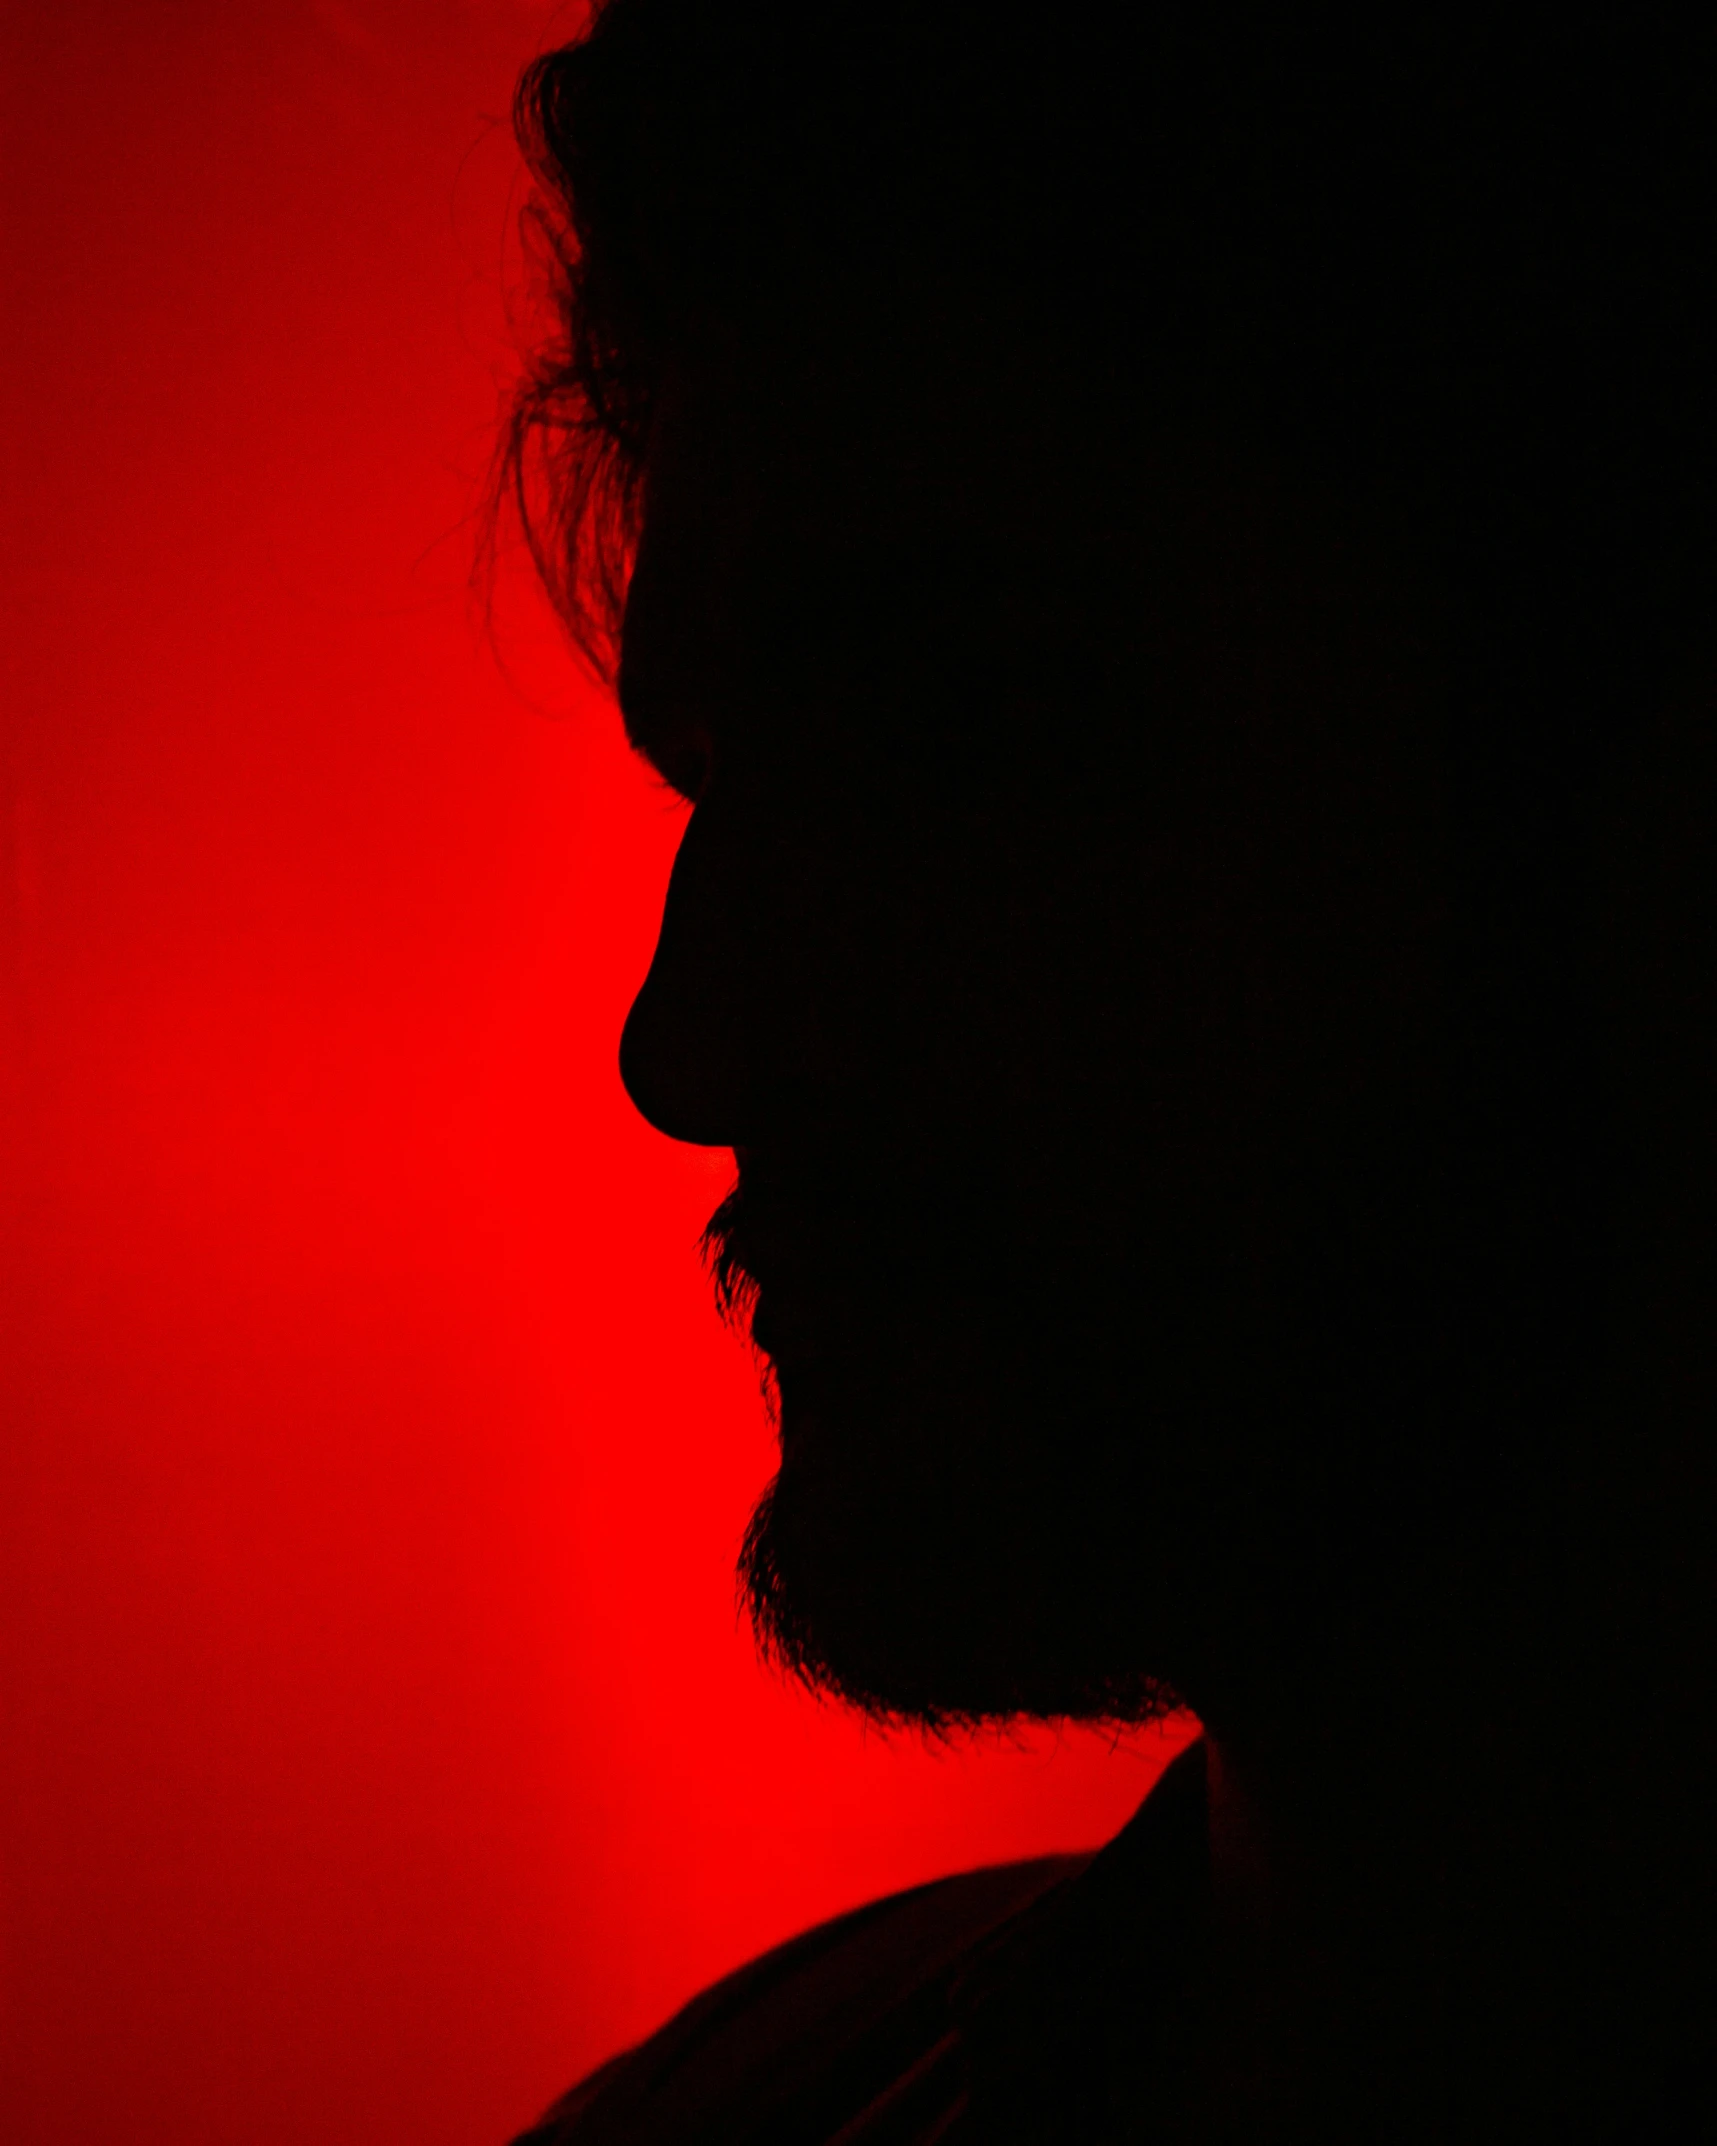 the person is silhouetted against the red background